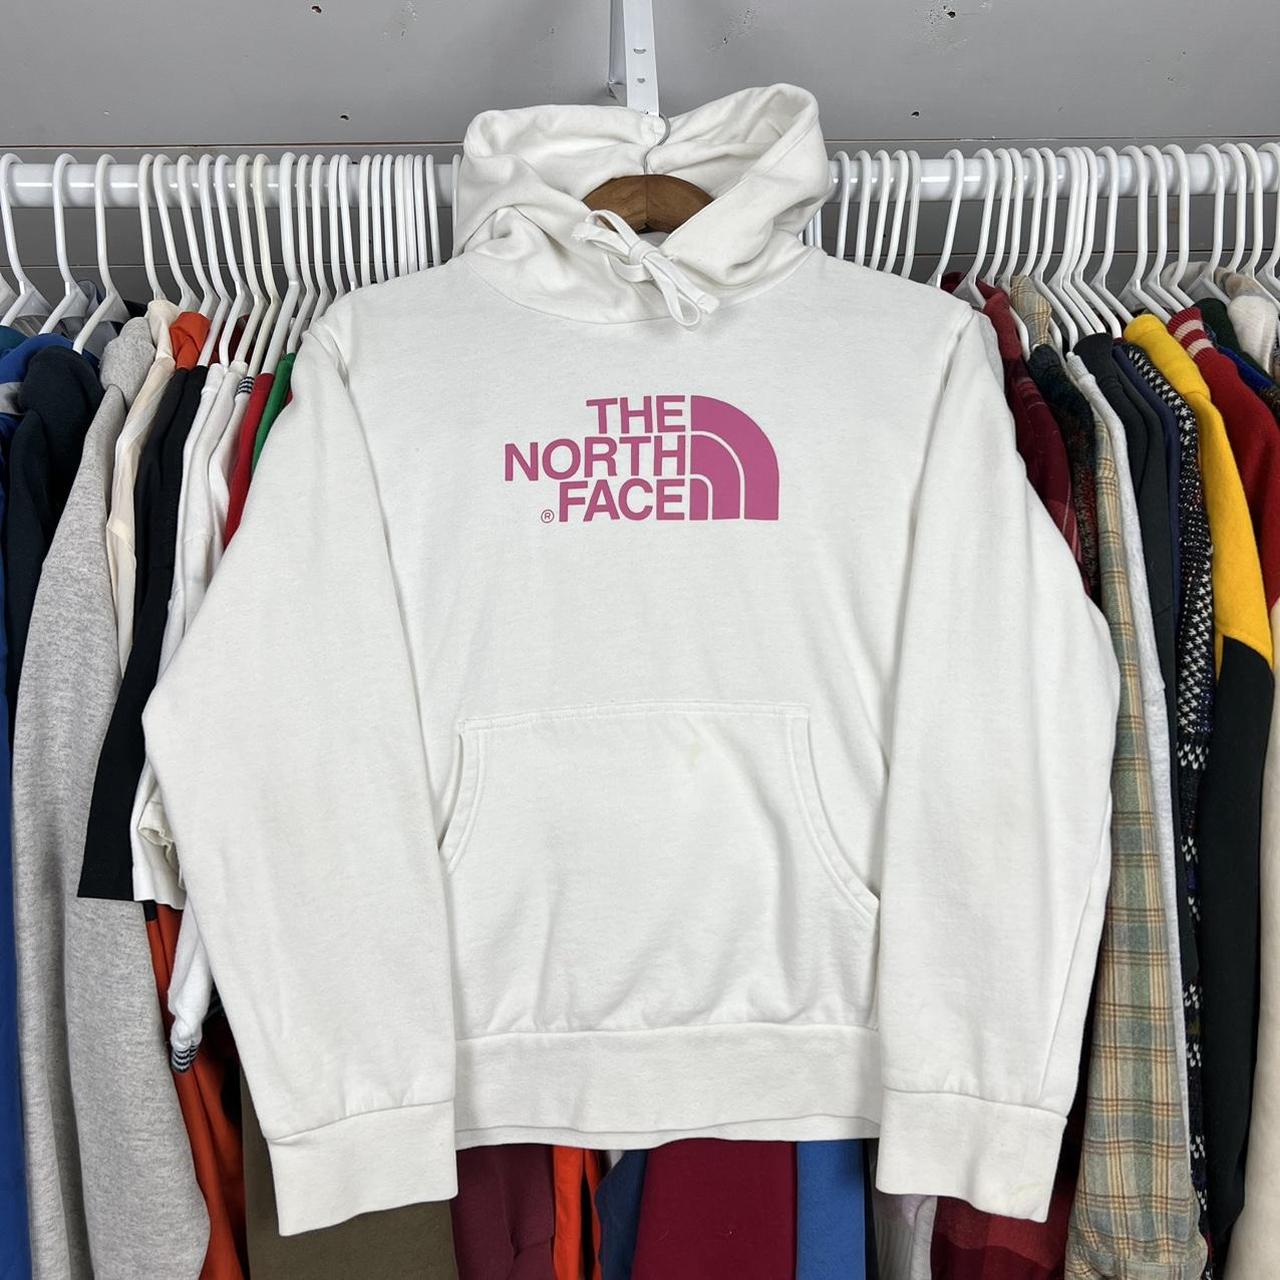 The North Face Women's Pink and White Hoodie